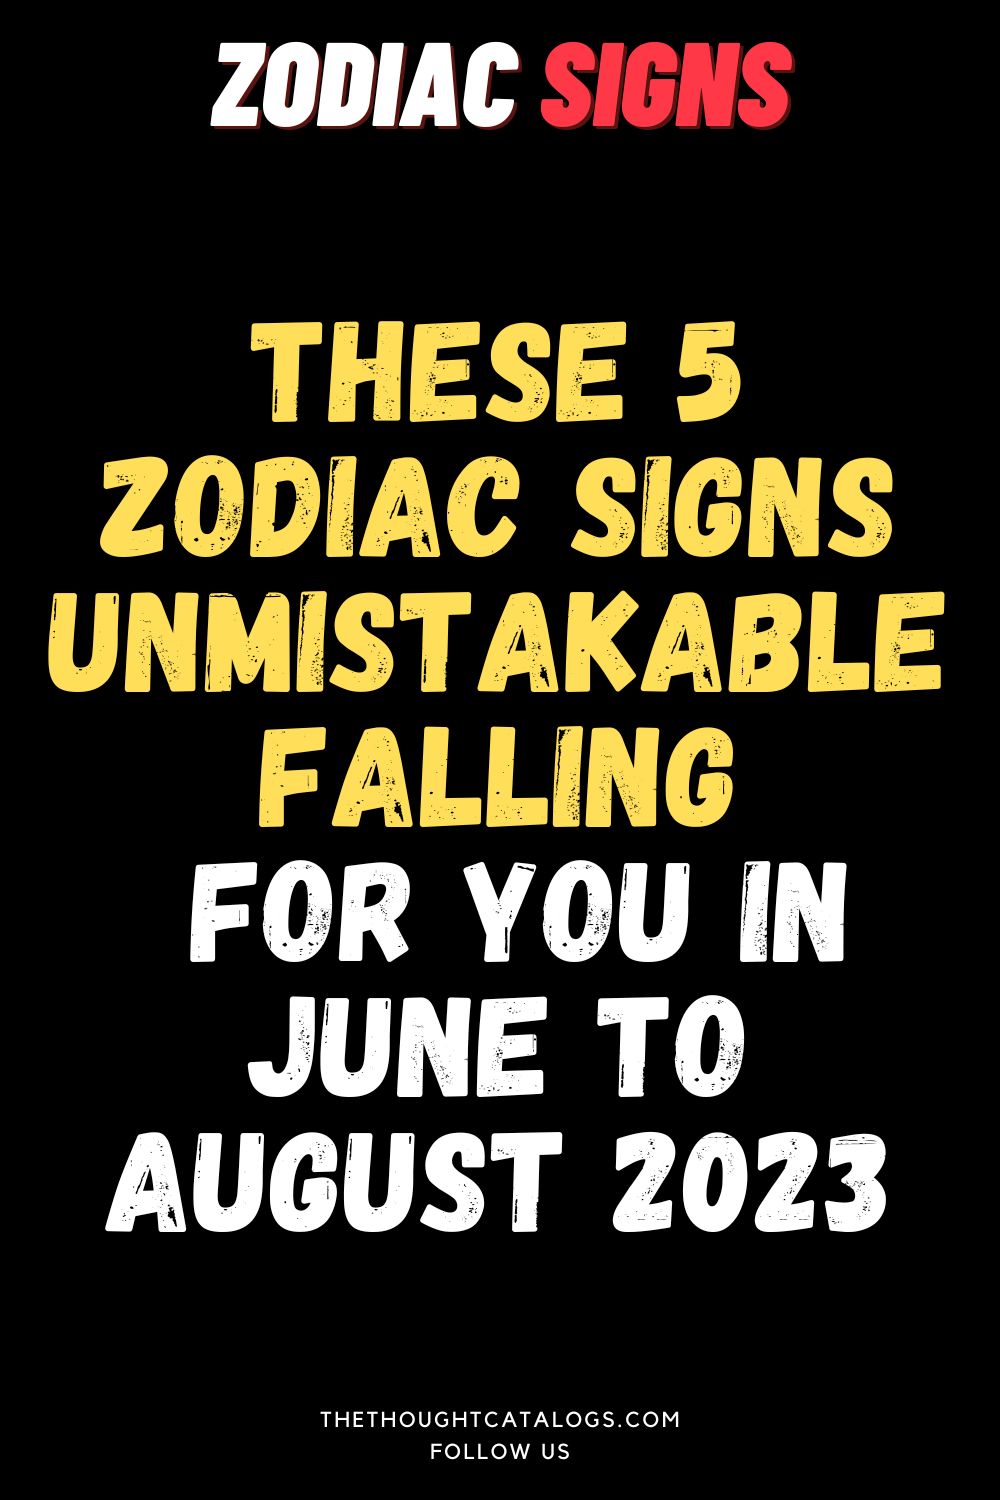 5 Zodiac Signs Unmistakable Falling For You In June To August 2023